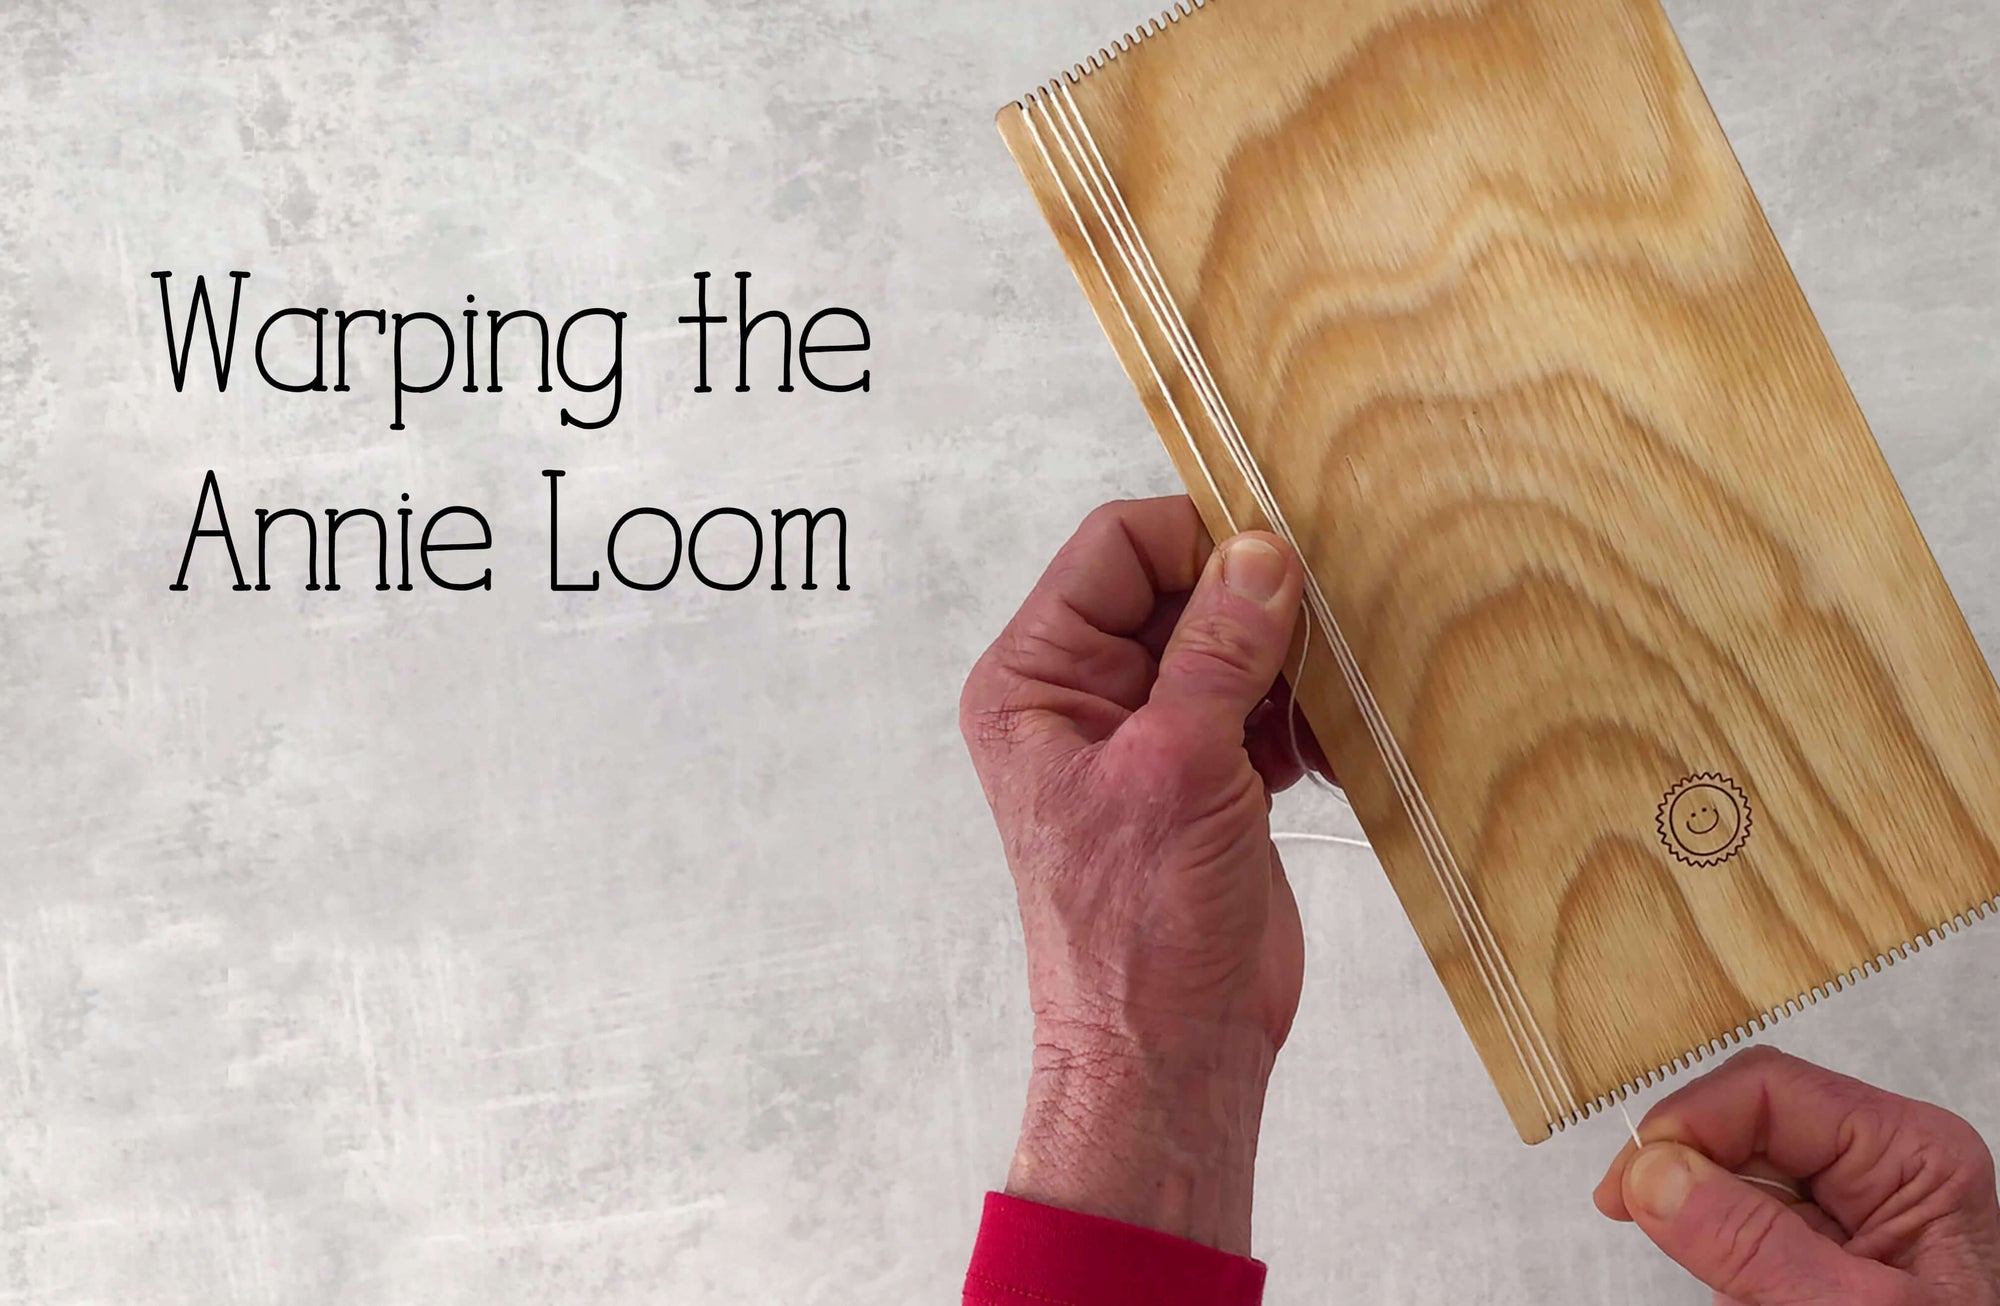 How to Warp the Annie Loom